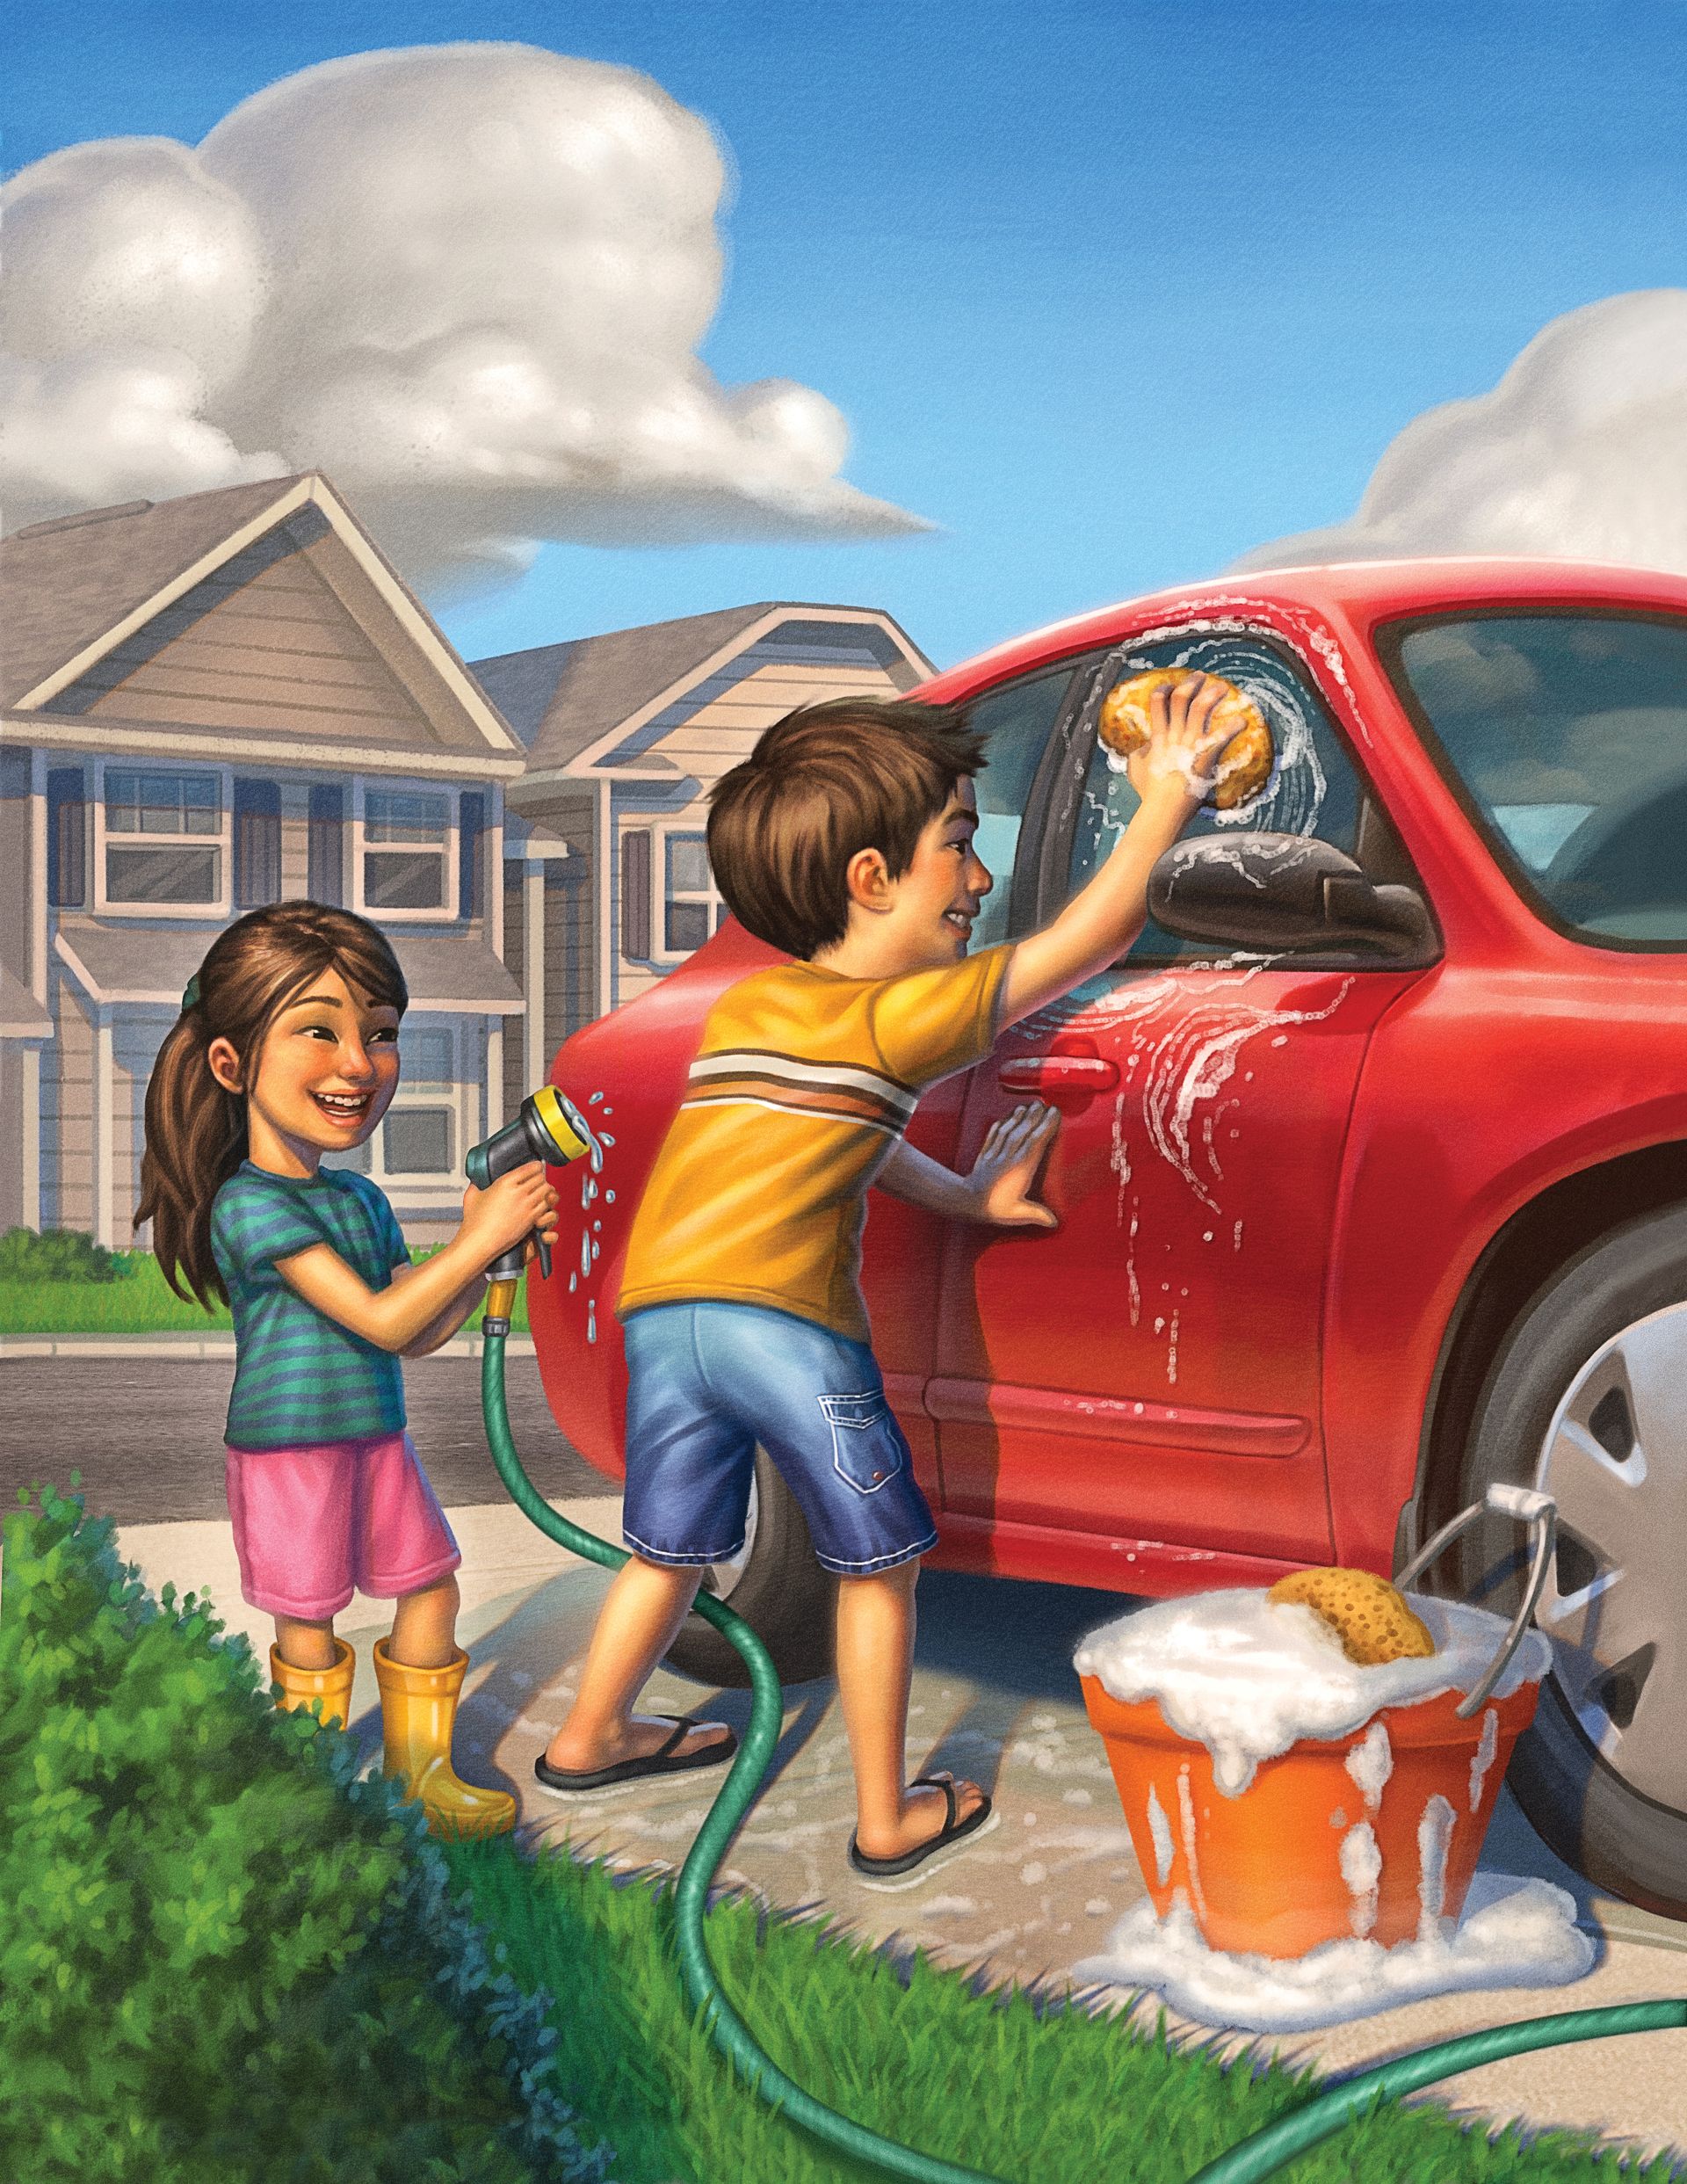 A brother and a sister wash the car together in the driveway.